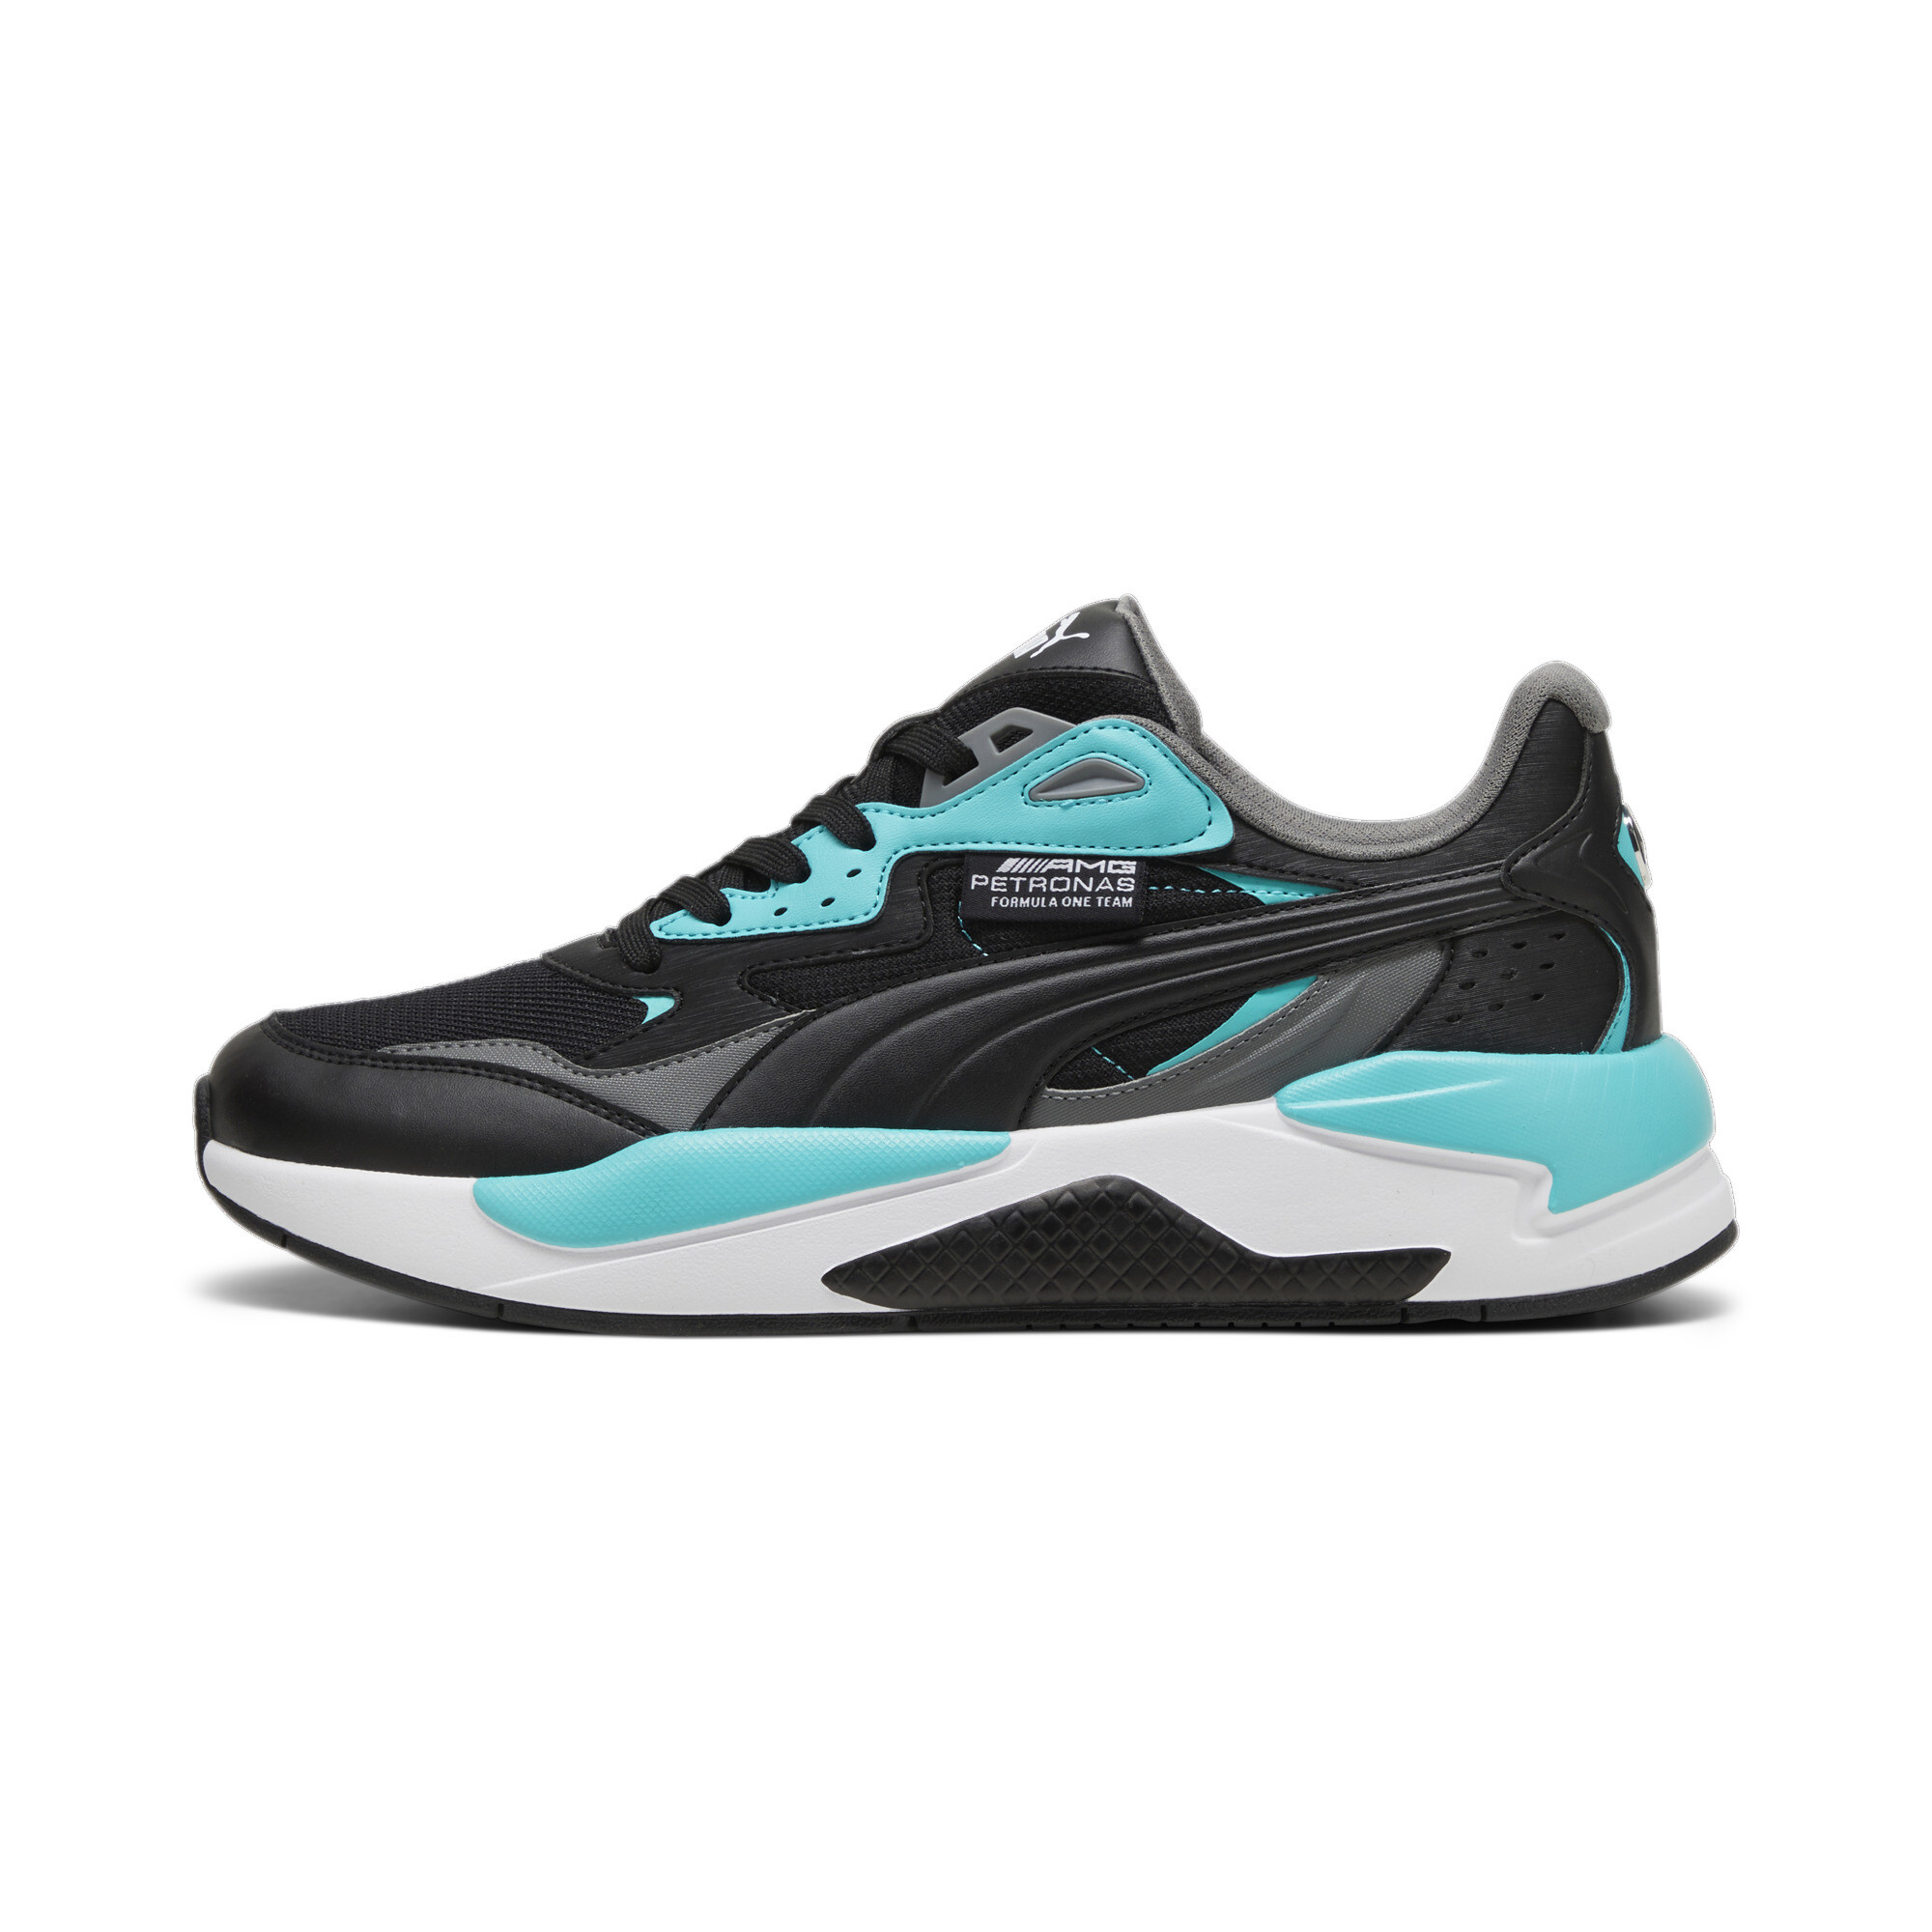 Puma Mercedes F1 X-Ray Speed Motorsport Shoes, Black, Size 37, Shoes